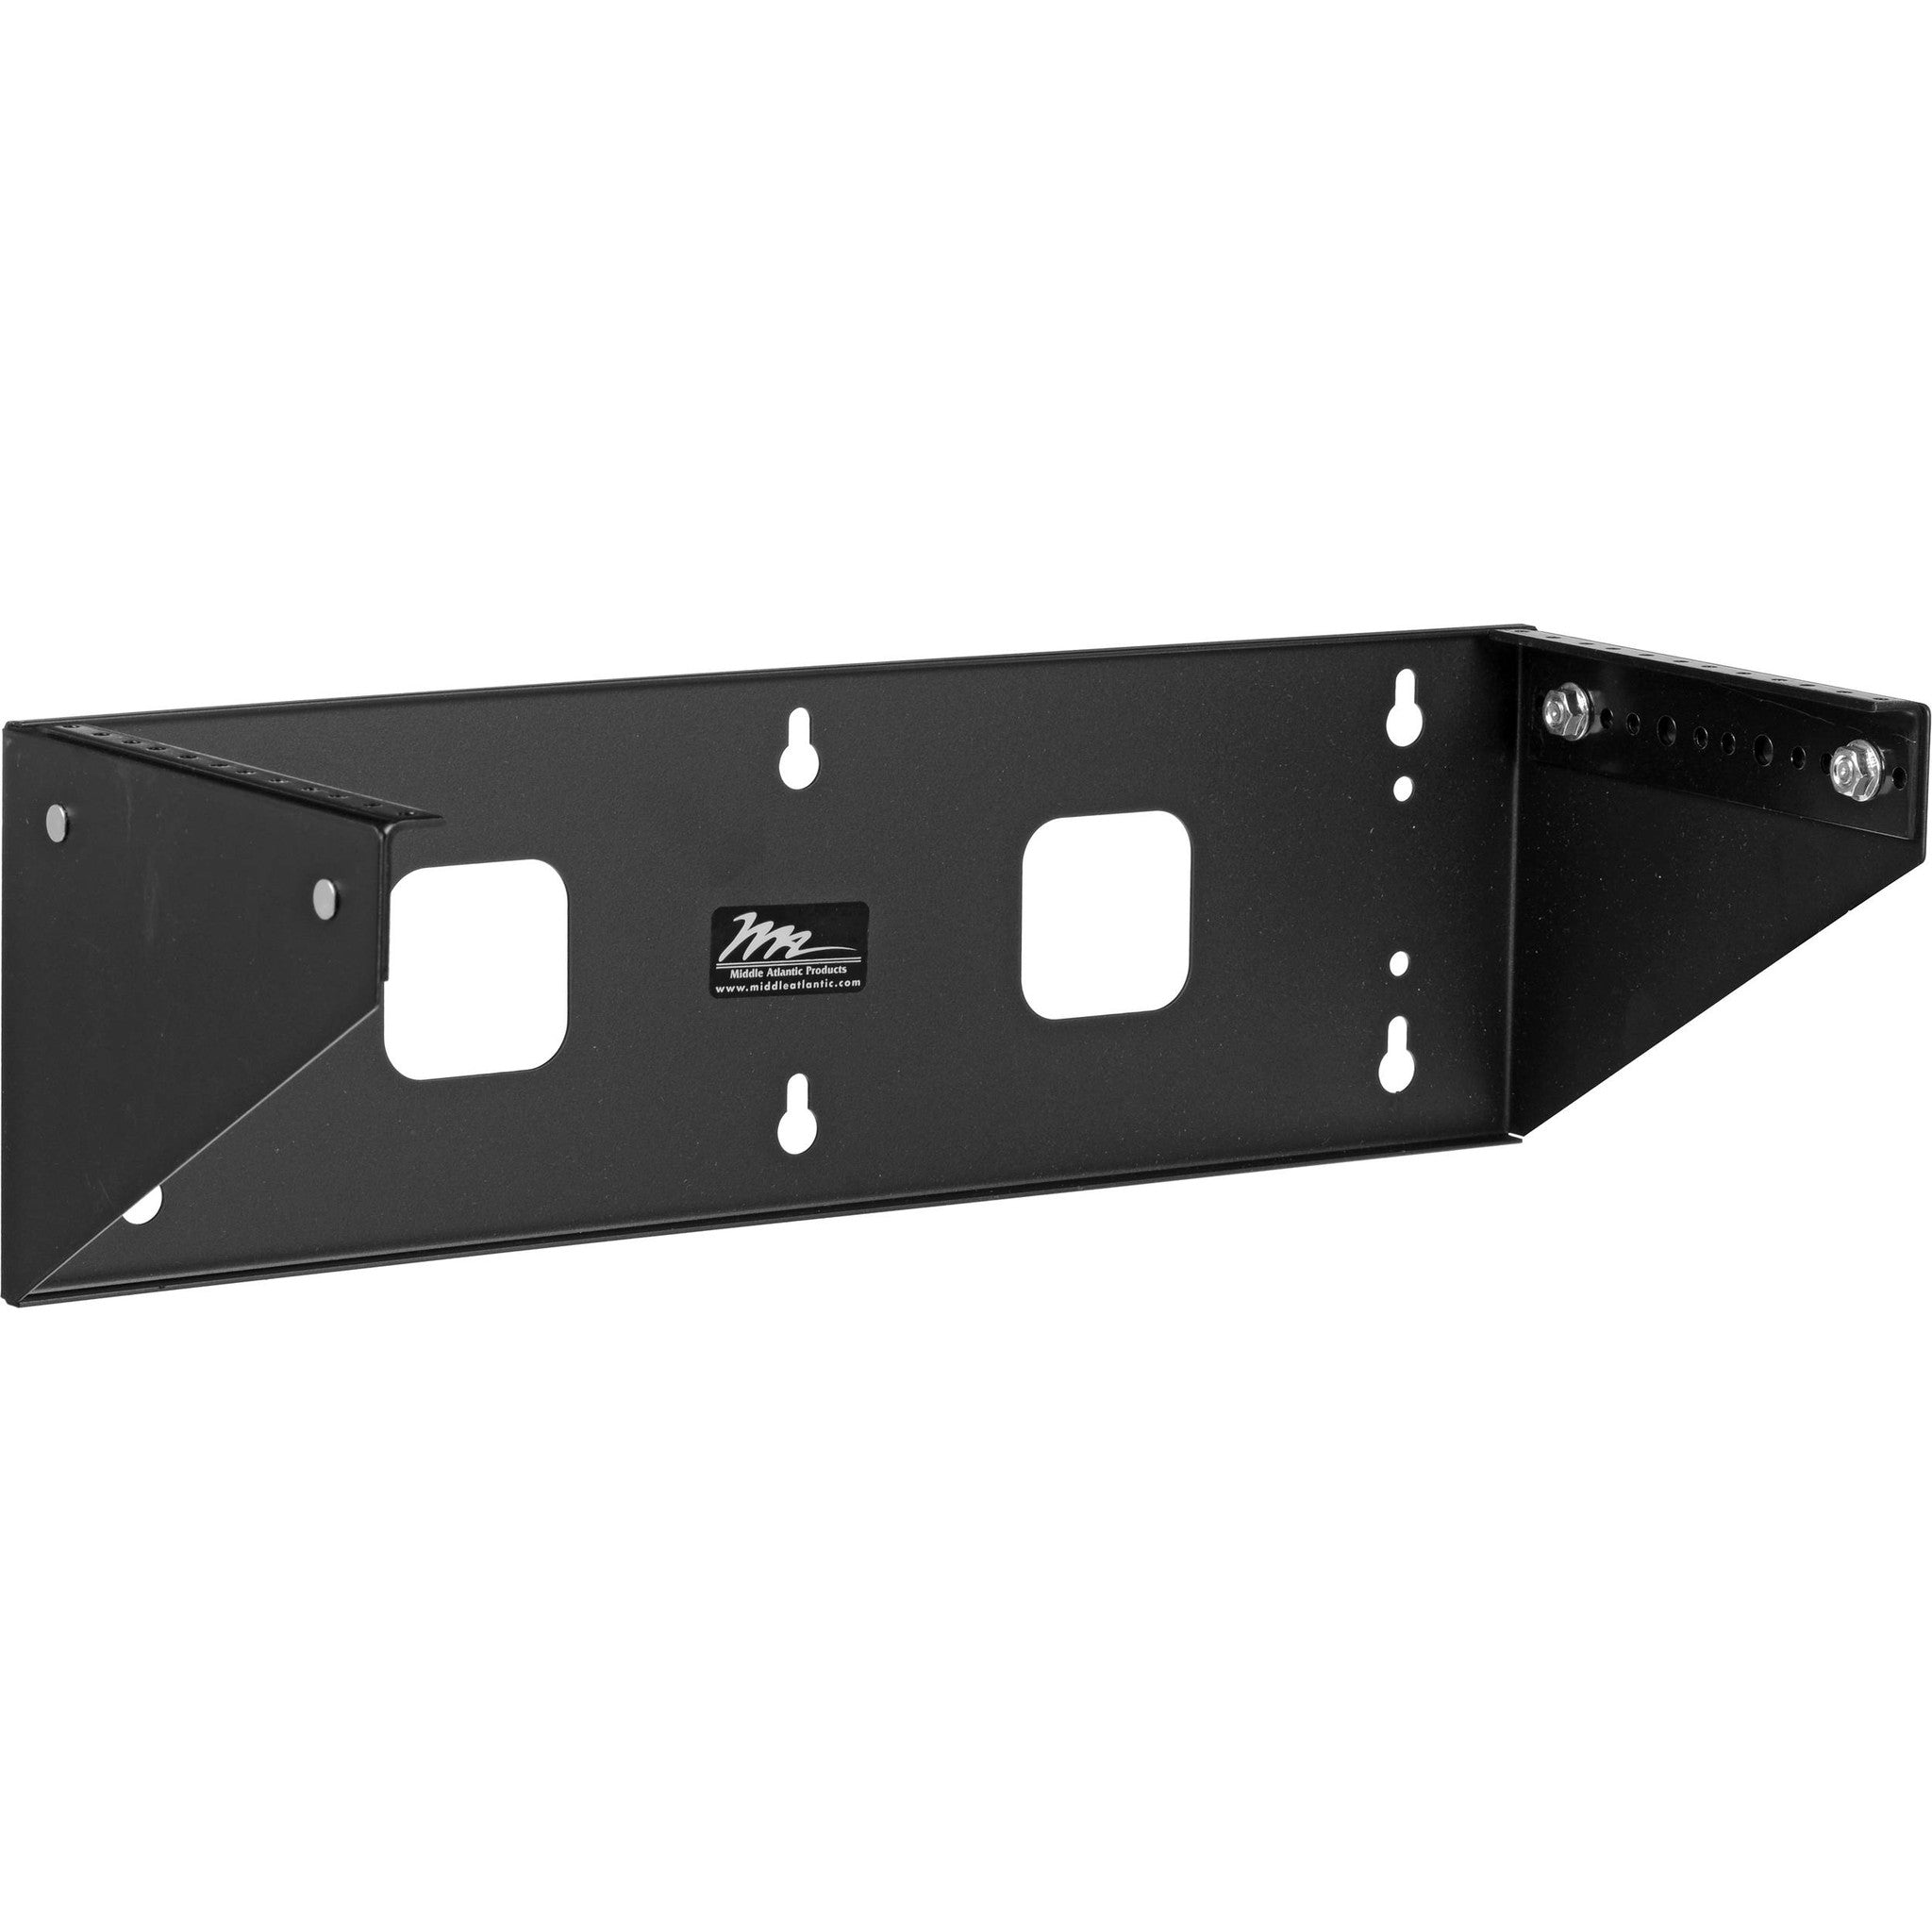 Middle Atlantic VPM-4 4 space Vertcal Panel Mount - L.A. Music - Canada's Favourite Music Store!